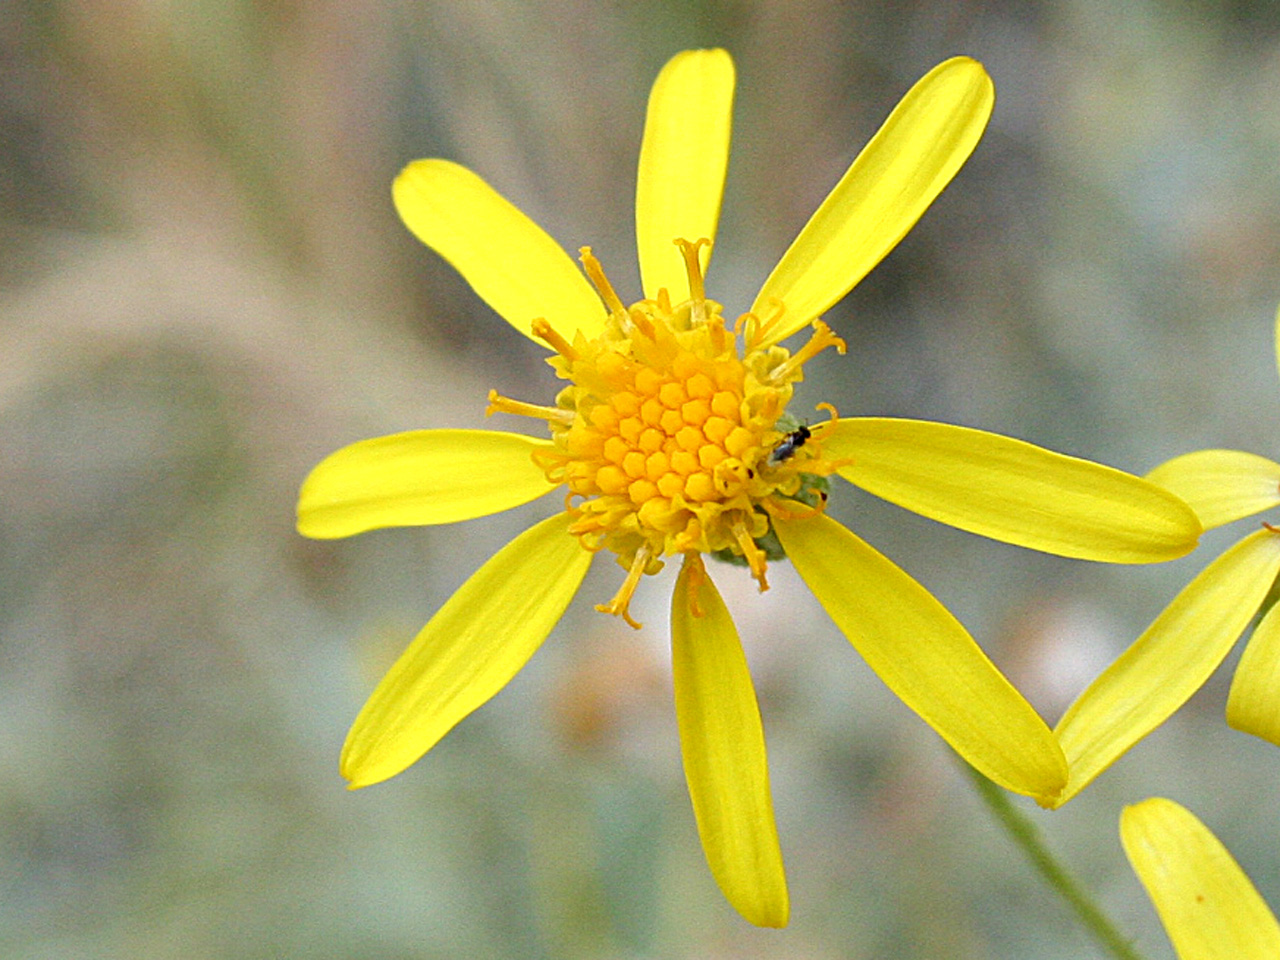 Dense, dark yellow central disk flowers and lighter yellow, sparsely arranged rays